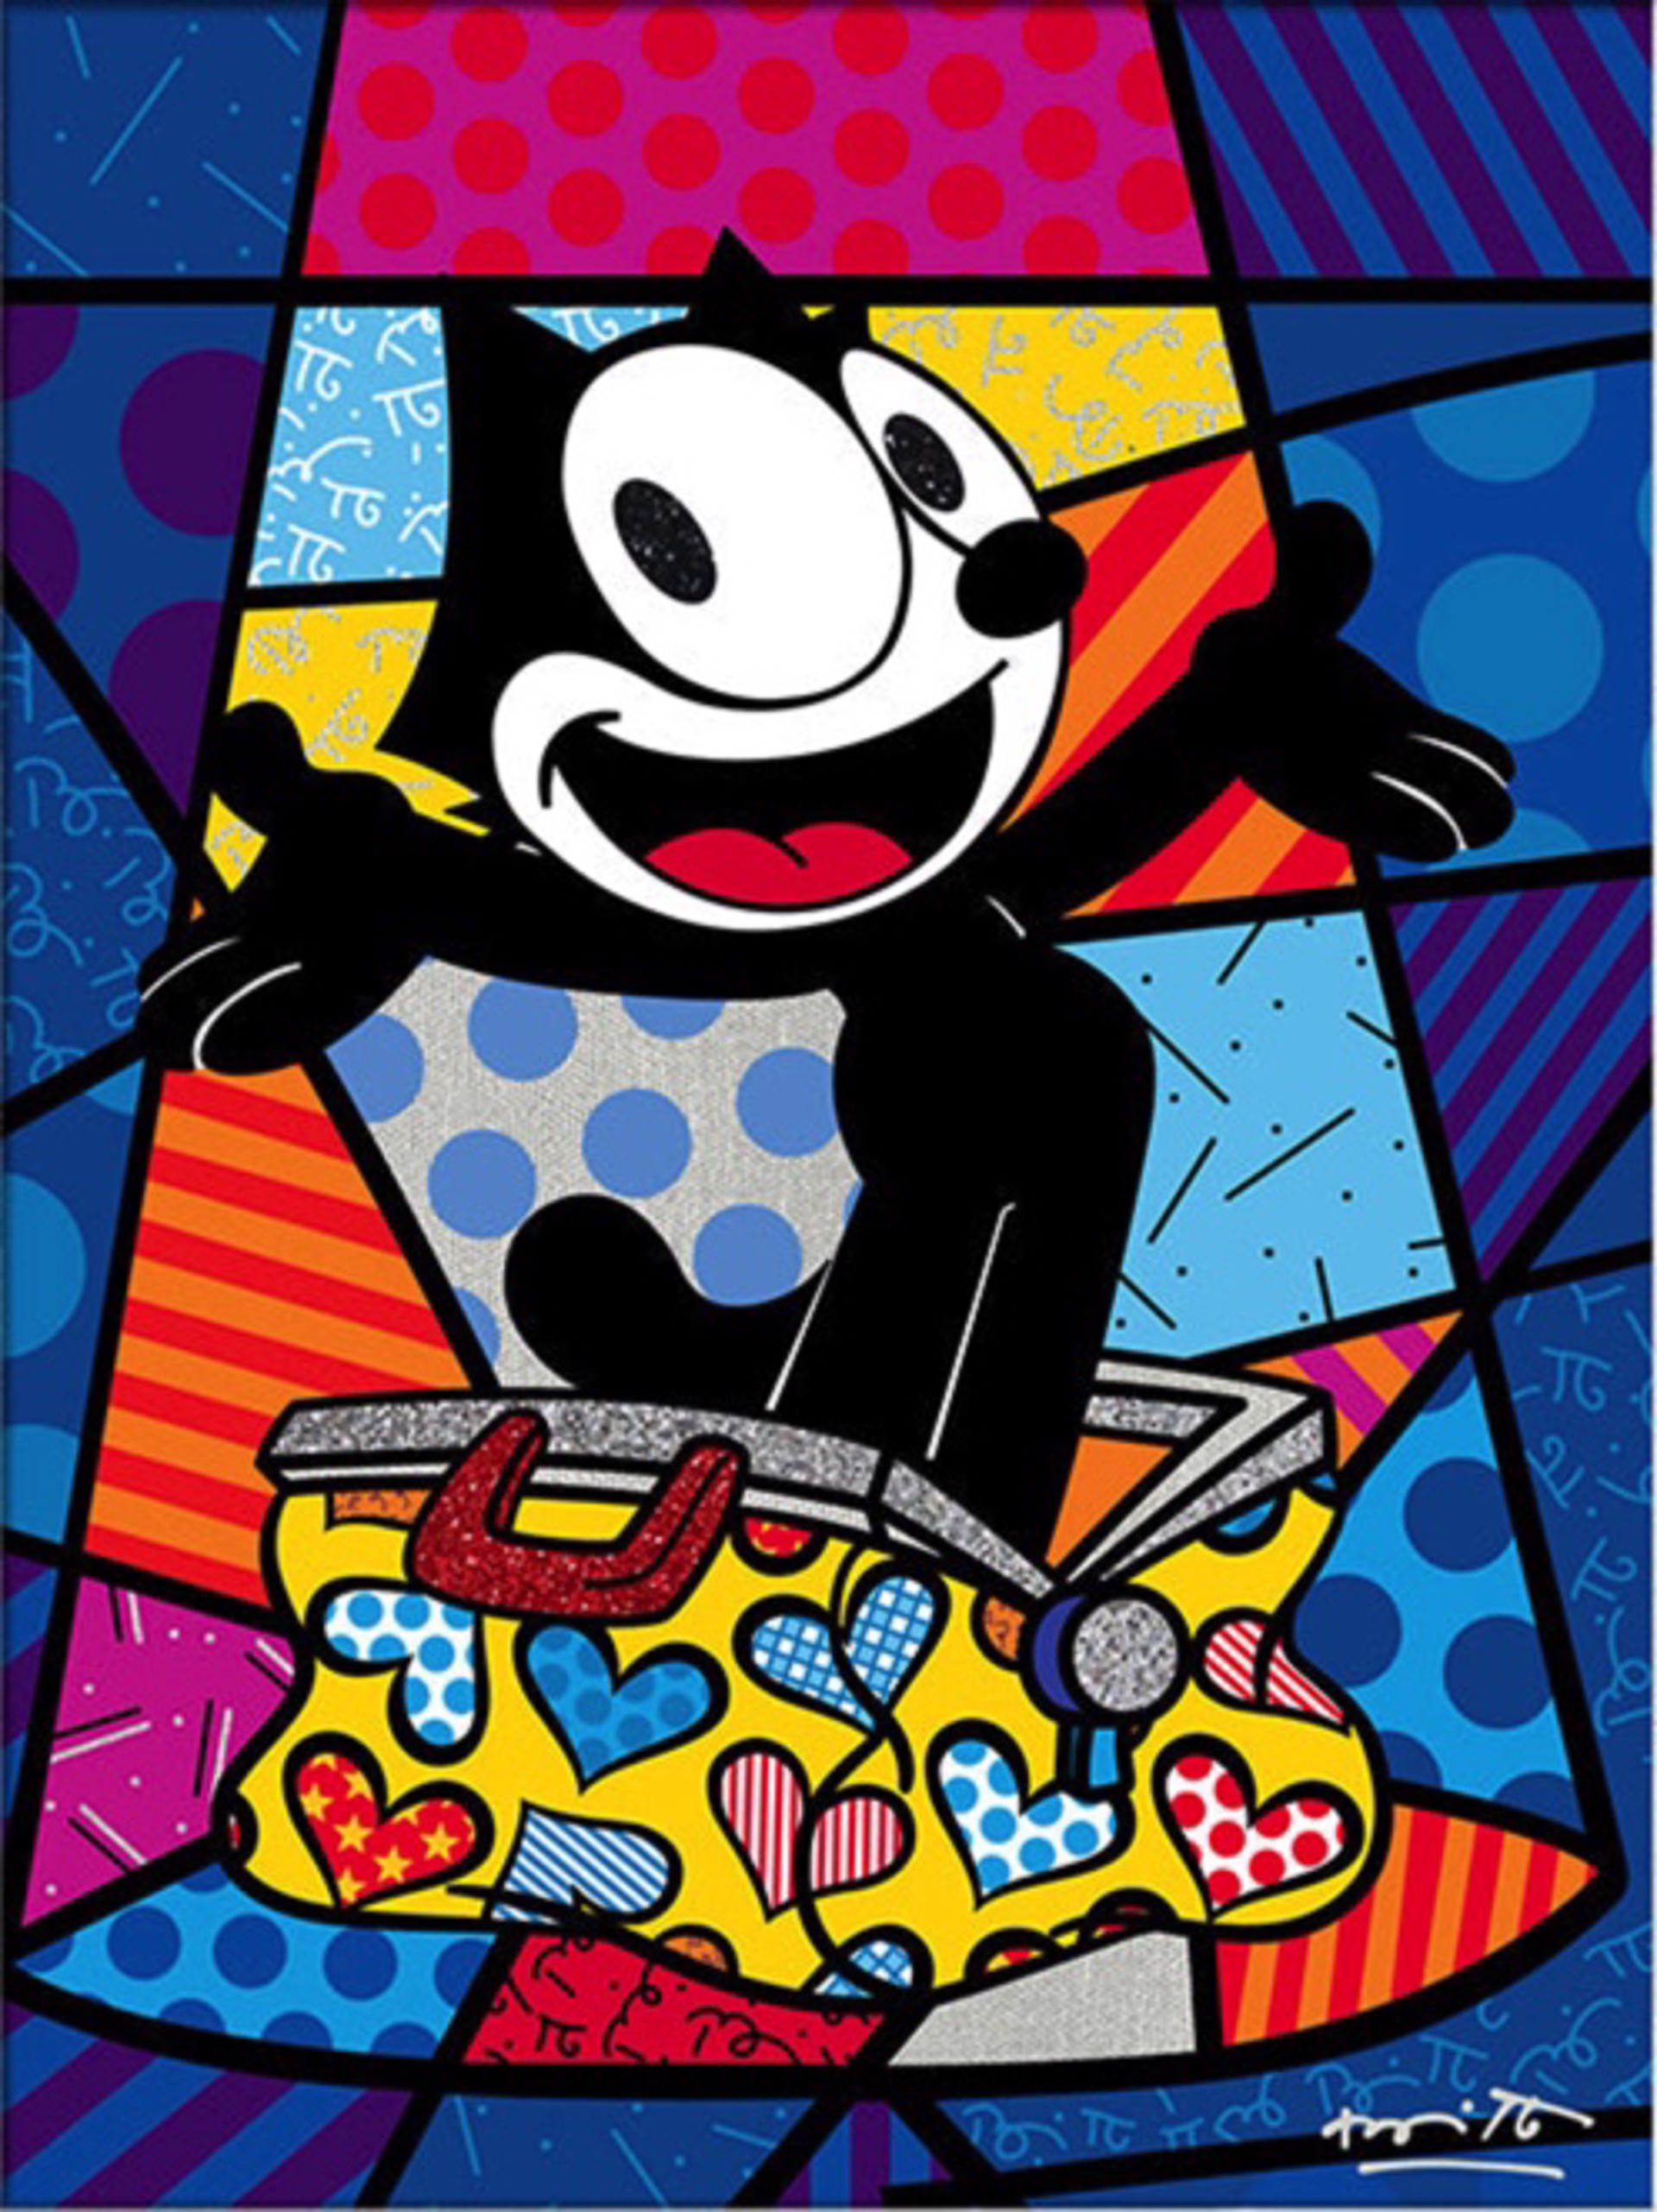 FELIX THE CAT - LIMITED EDITION PRINT - NBCUNIVERSAL by Romero Britto